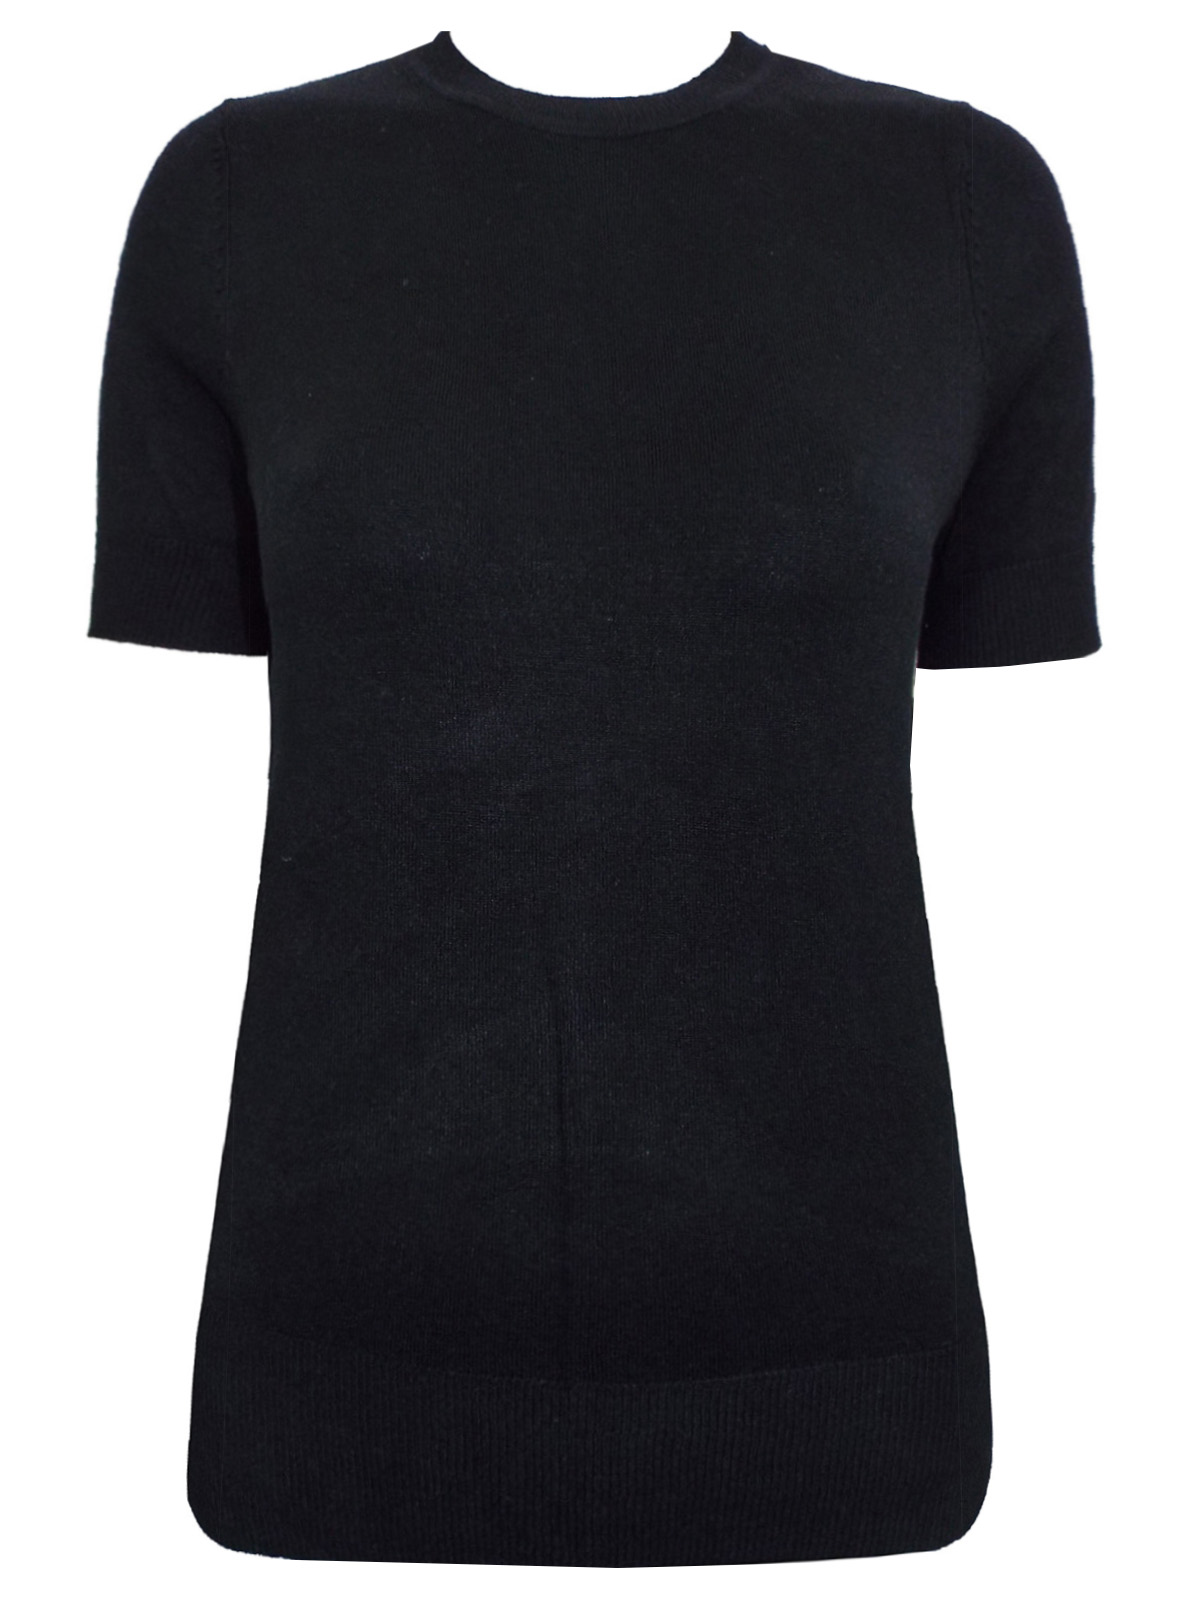 Marks and Spencer - - M&5 BLACK Knitted Crew Neck Short Sleeve Top ...